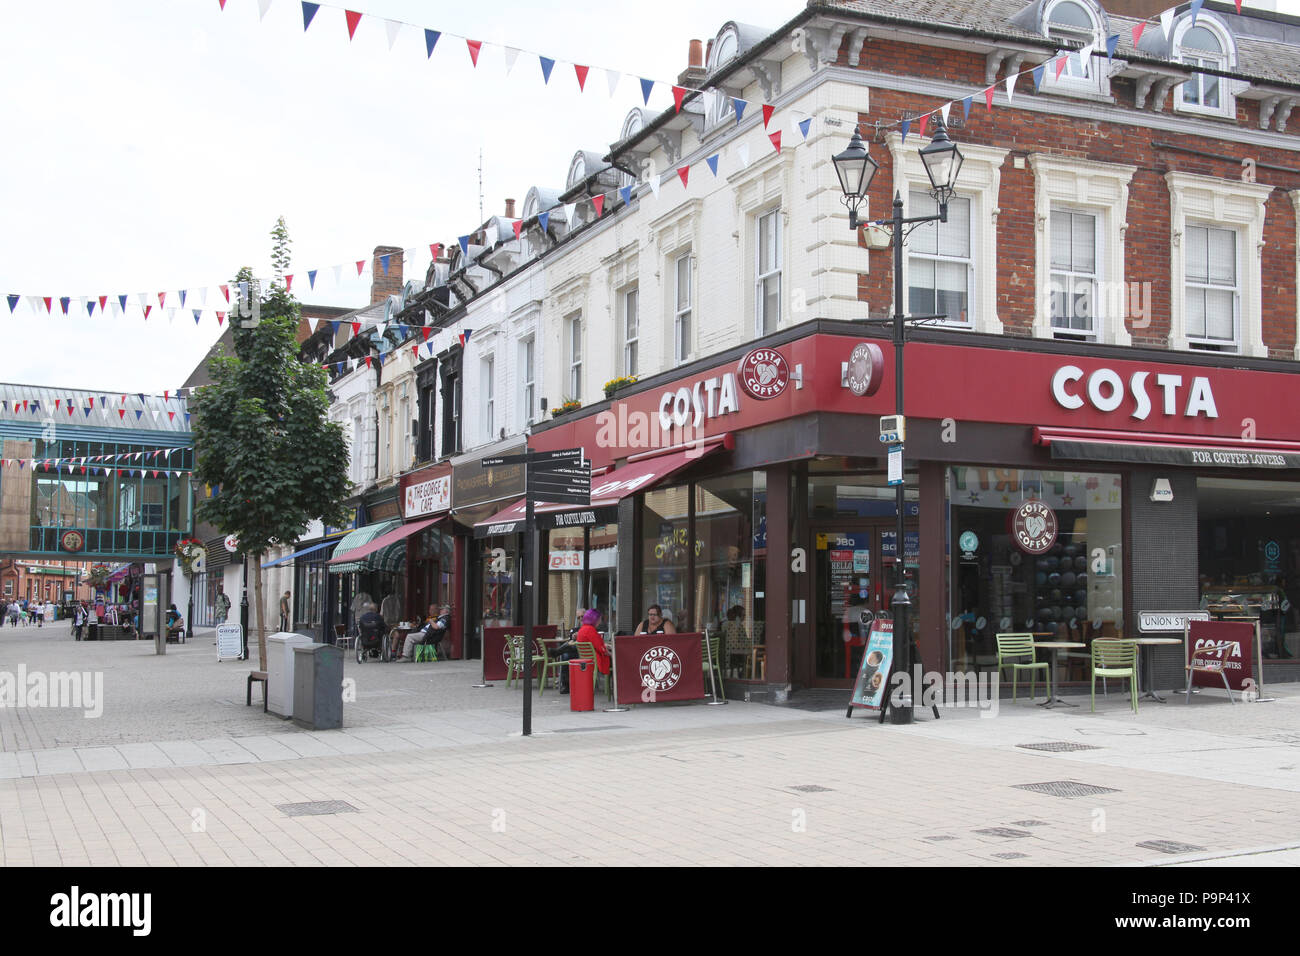 The shopping precinct in Aldershot, UK with Costa Coffee prominent. Stock Photo